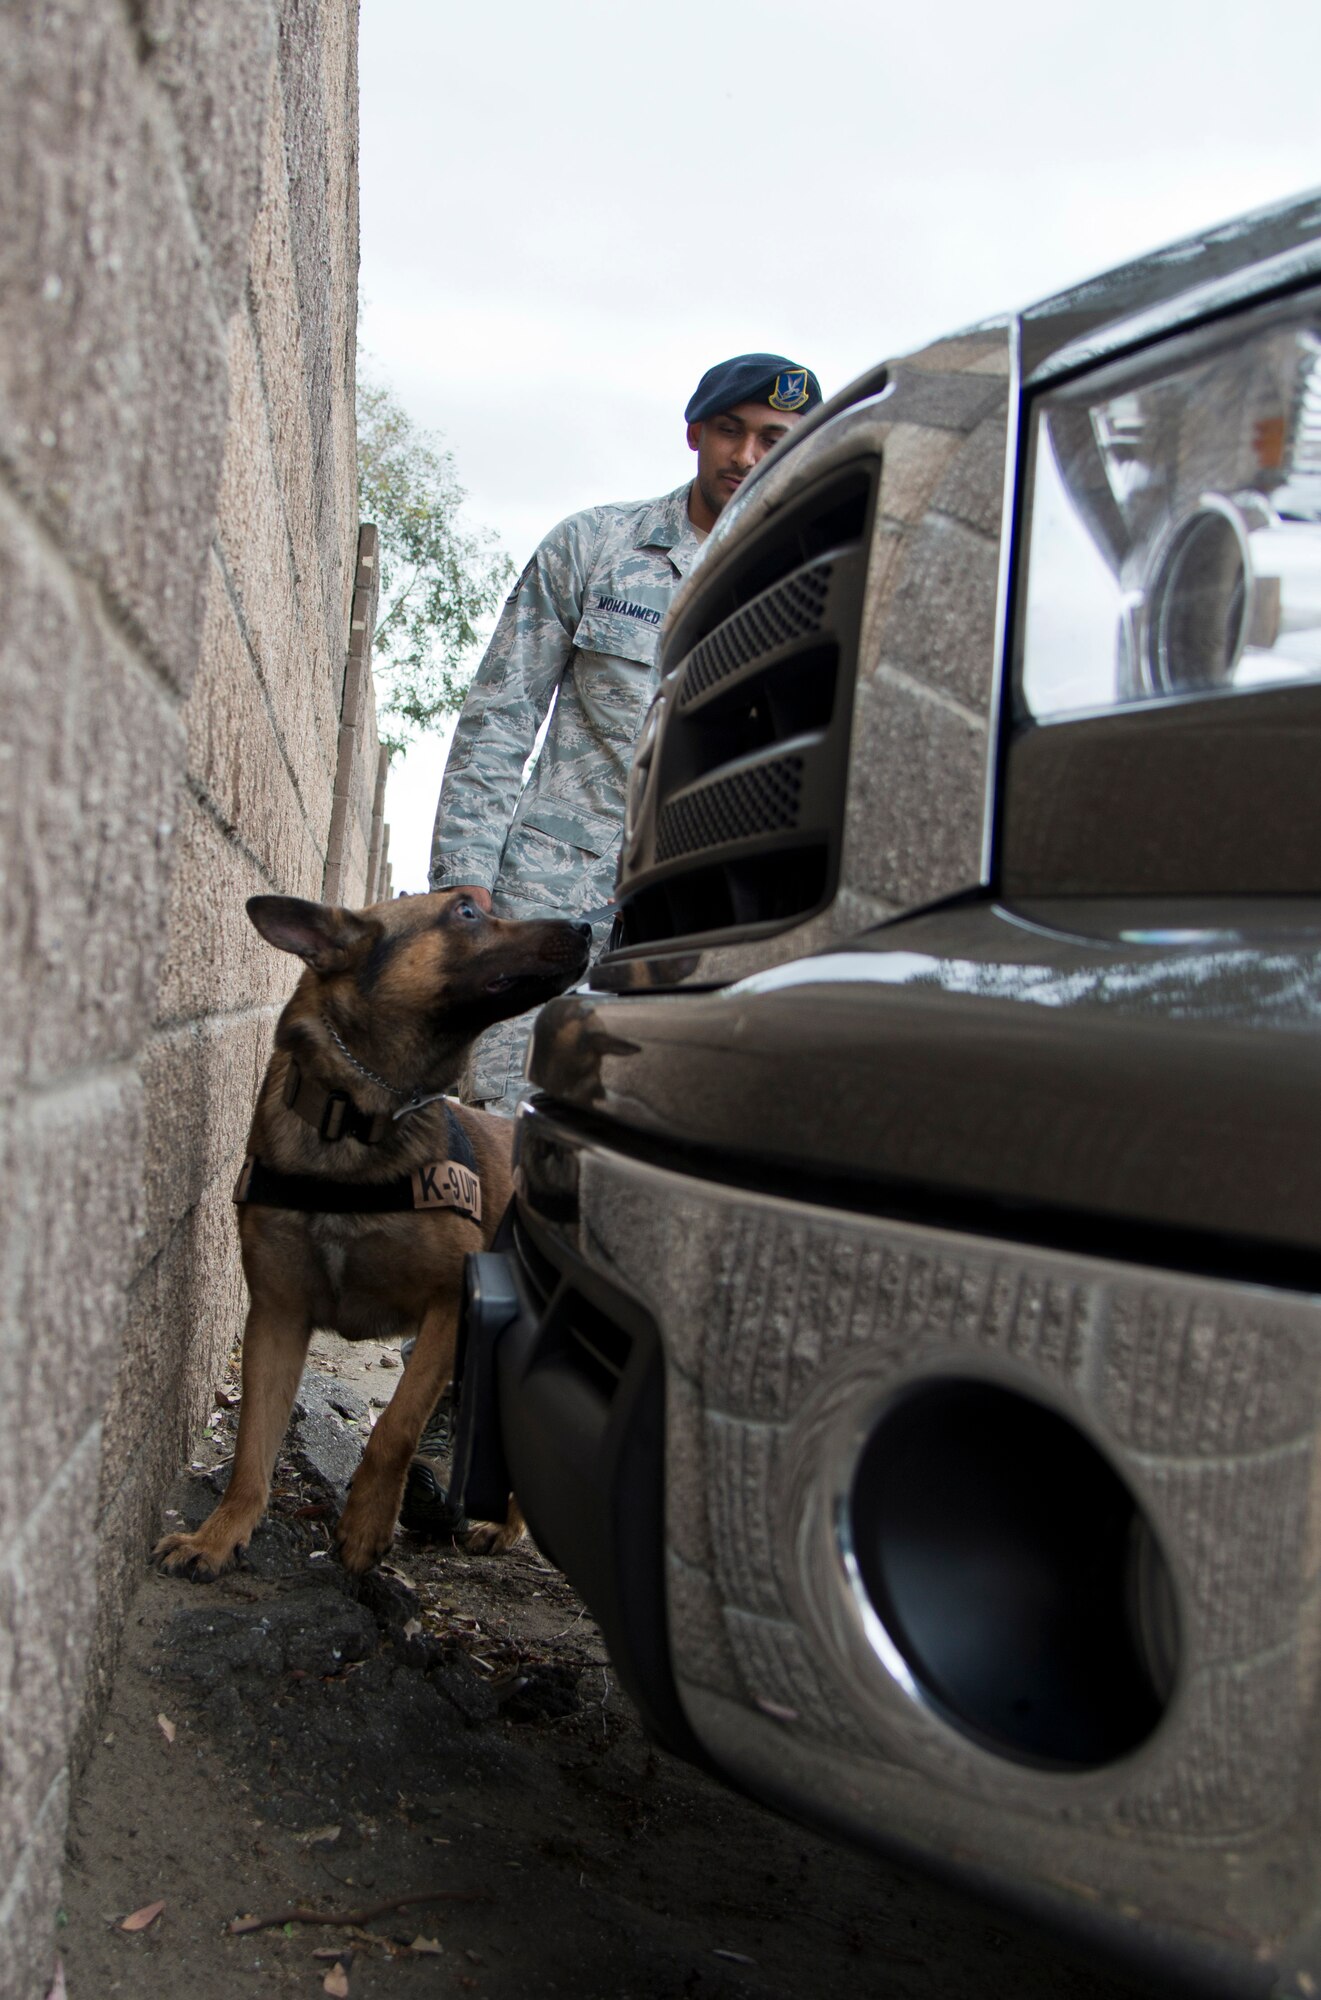 Staff Sgt. Zahir Mohammed, 60th SFS MWD handler, and Borat, 60th Security Forces Military Working Dog, search a vehicle for any explosives or narcotics during training on May 8. The pair will compete in both the detection and protection portion of the 2014 Defenders K9 Trials. (U.S. Air Force photo/Senior Airman Nicole Leidholm)